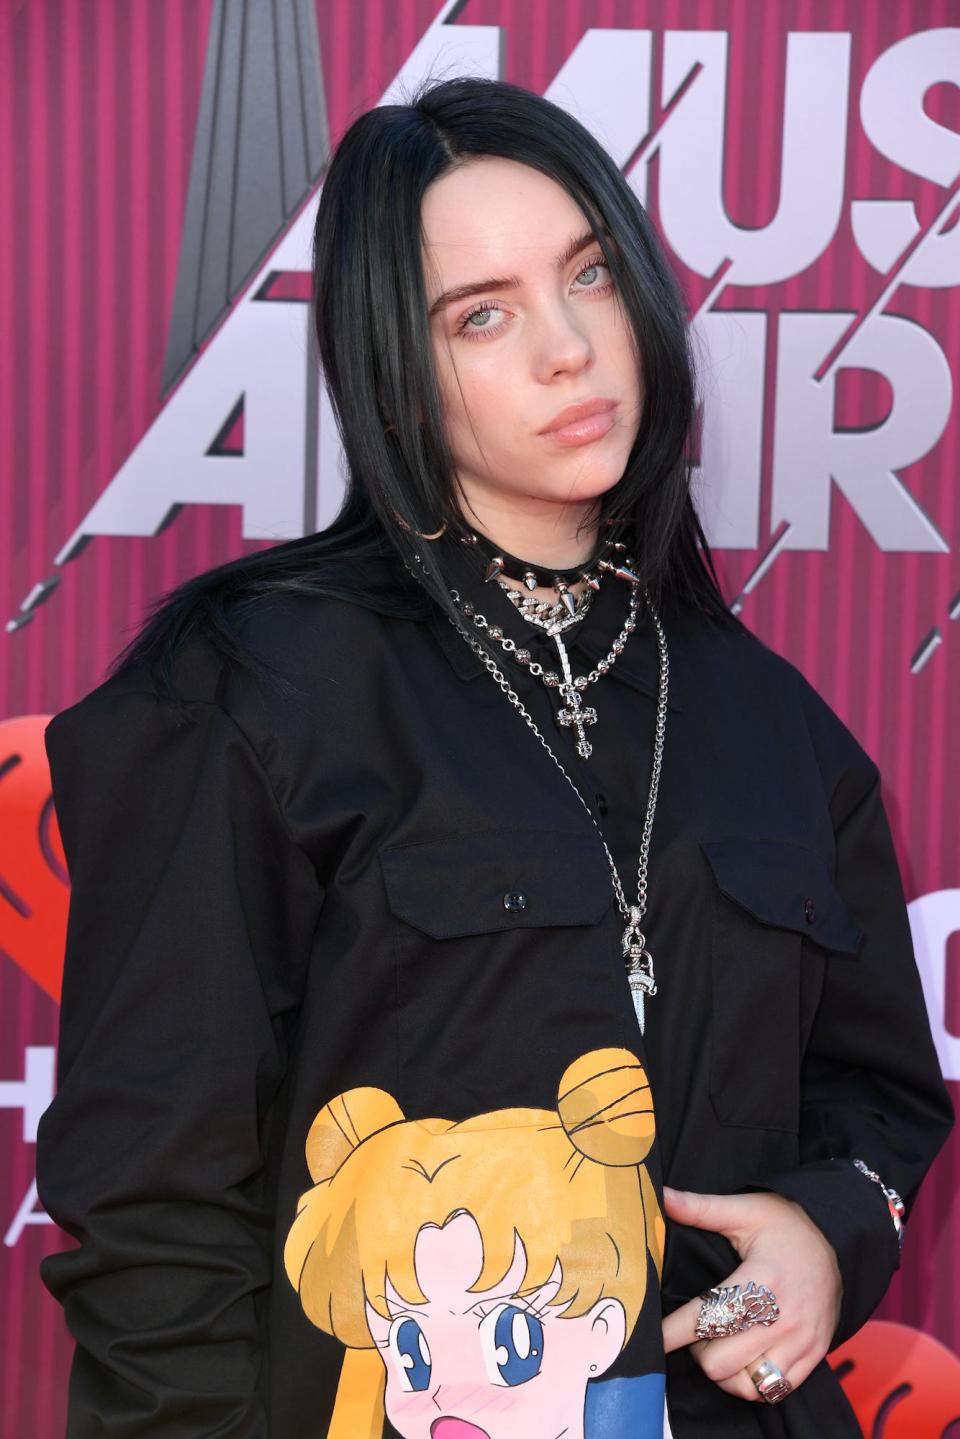 Billie Eilish attends the iHeartRadio Music Awards on March 14, 2019.